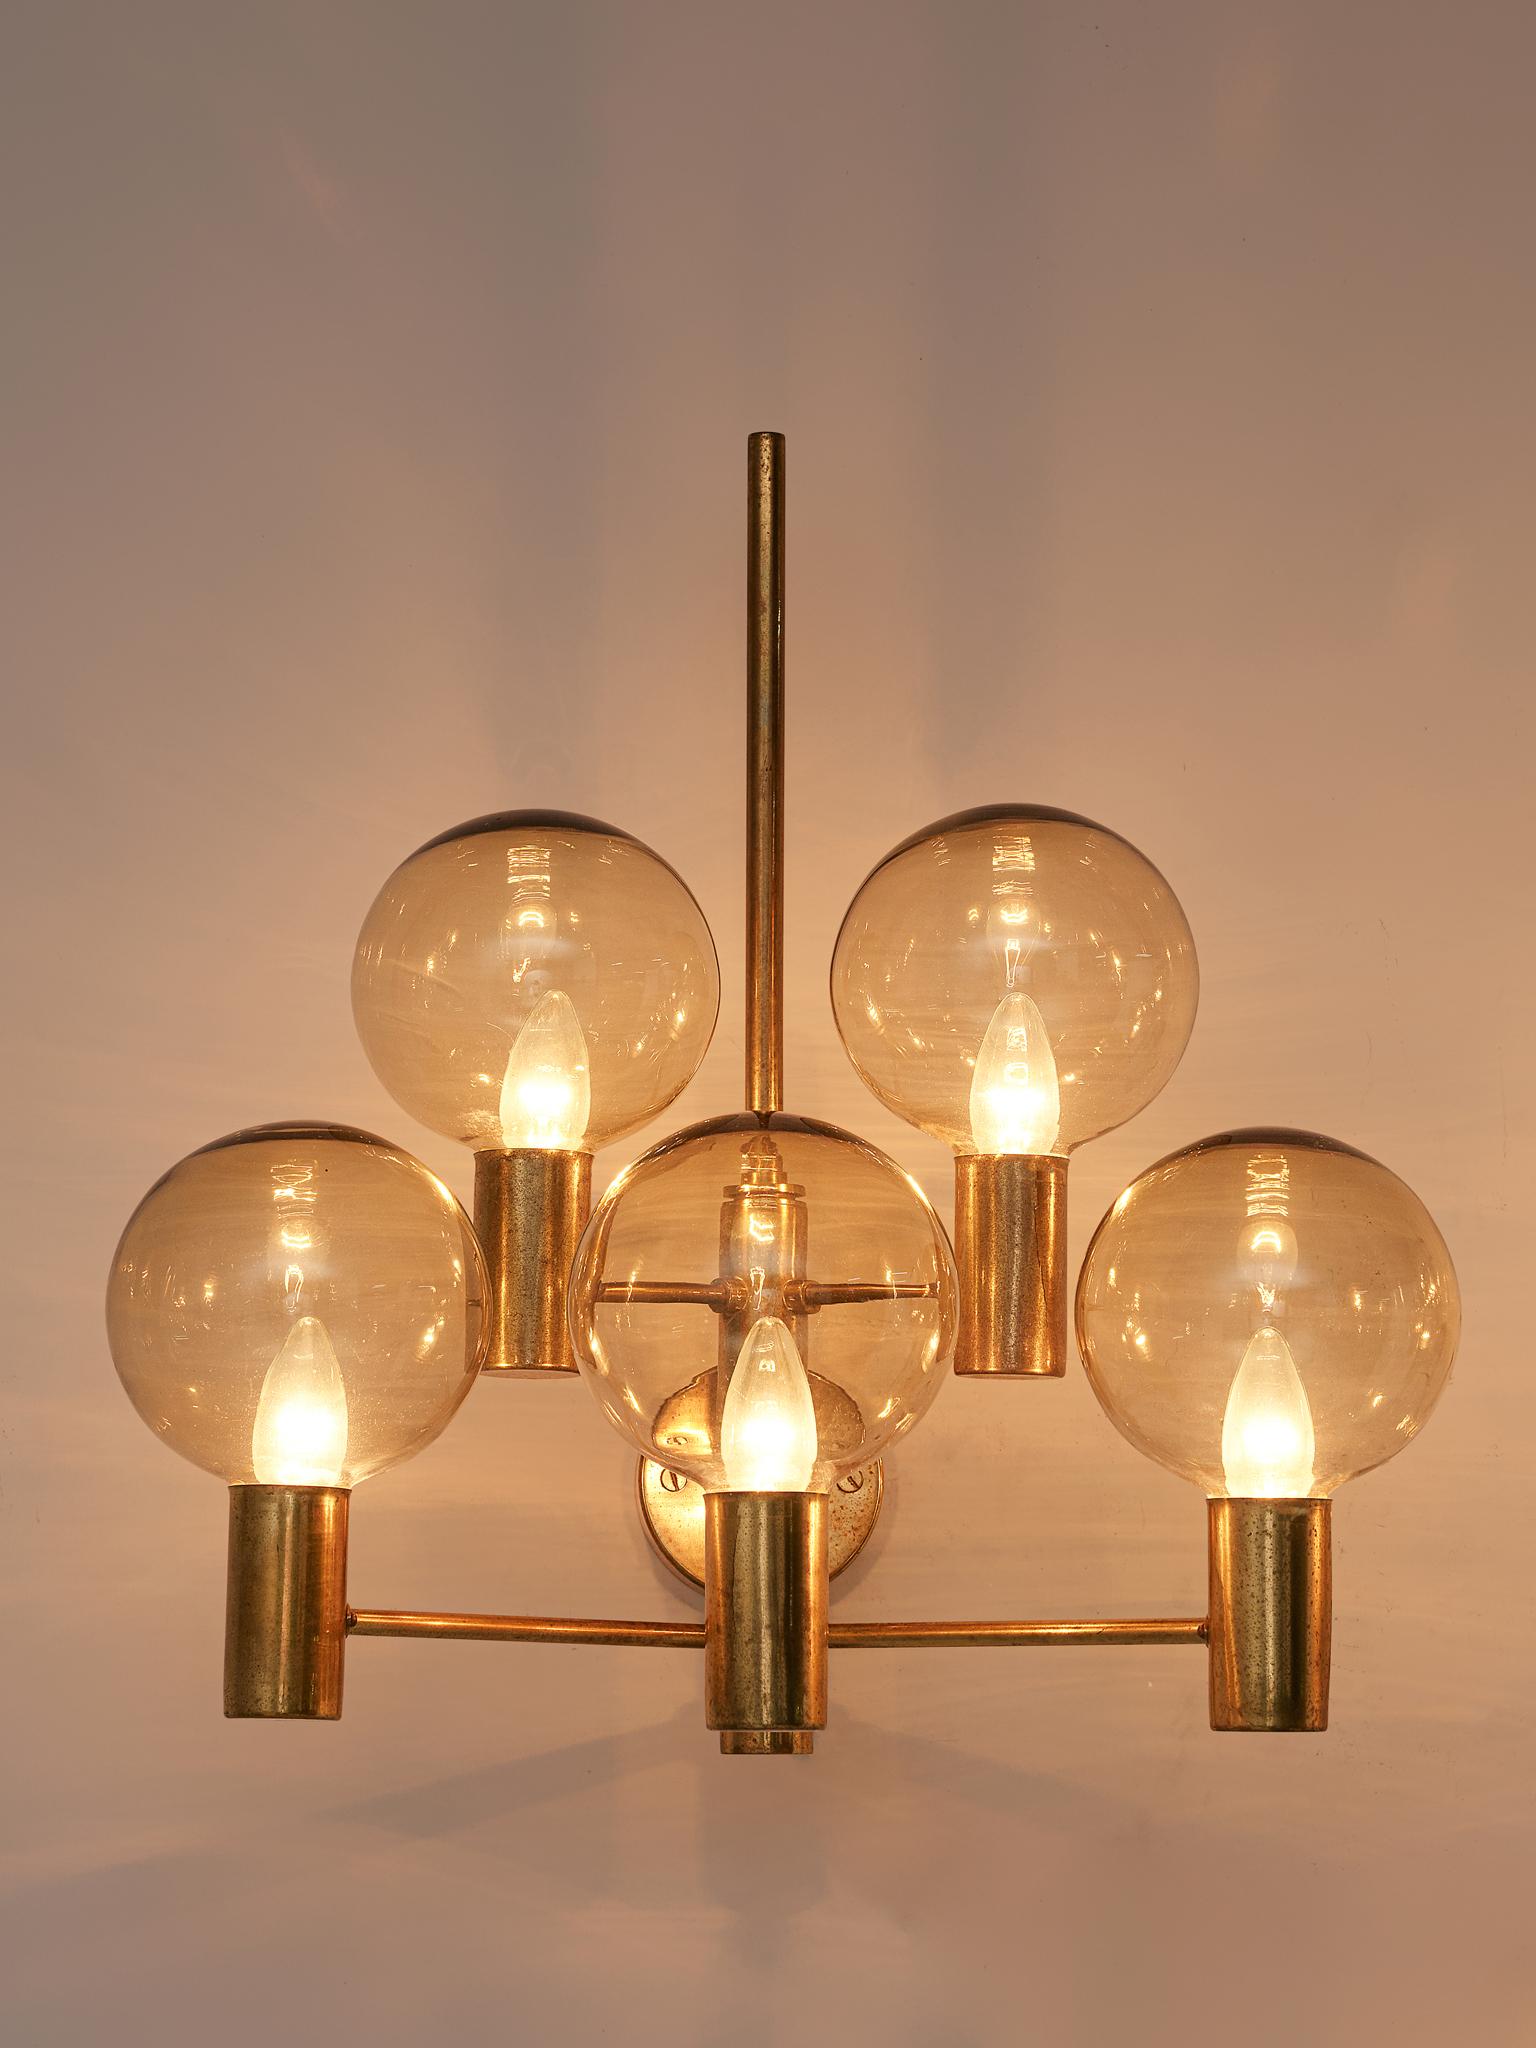 Hans Agne Jakobsson, wall light, brass, glass, Sweden, 1960s.

A large wall light in patinated brass with clear glass shades by Hans Agne Jakobsson. Divided over five arms this light creates a stunning light partition. The lights are large and